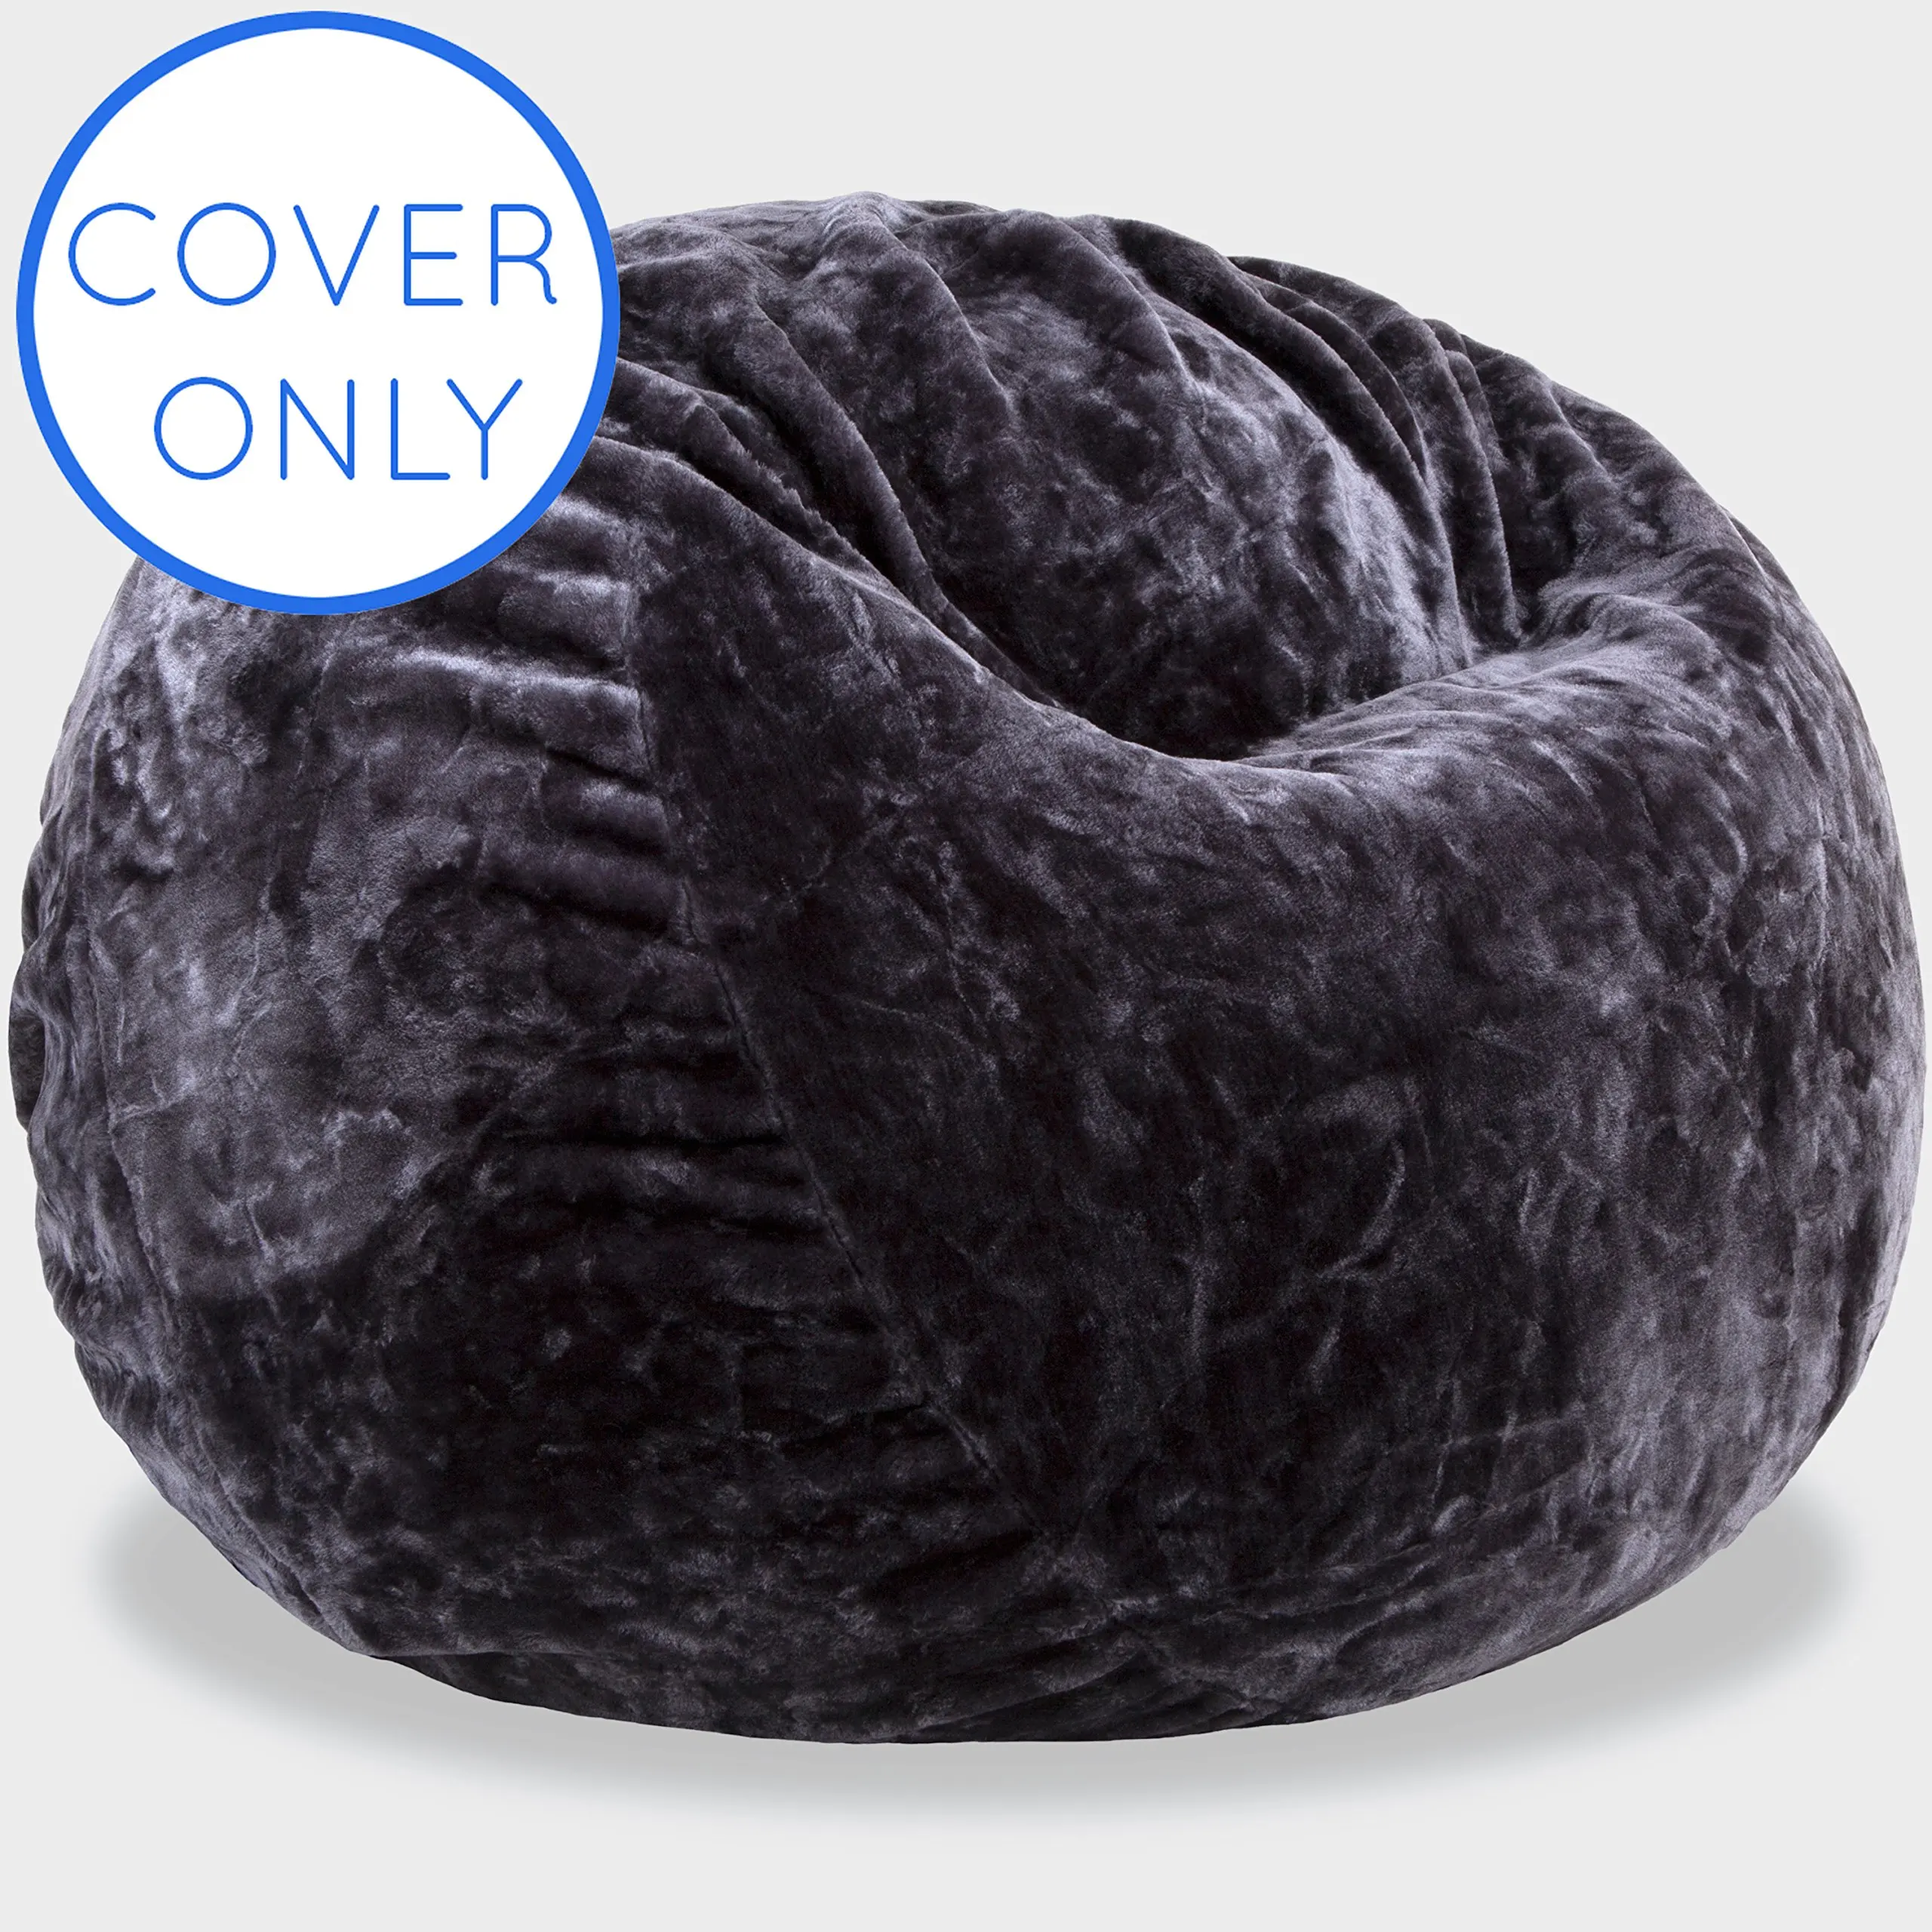 off brand lovesac bean bag with covers